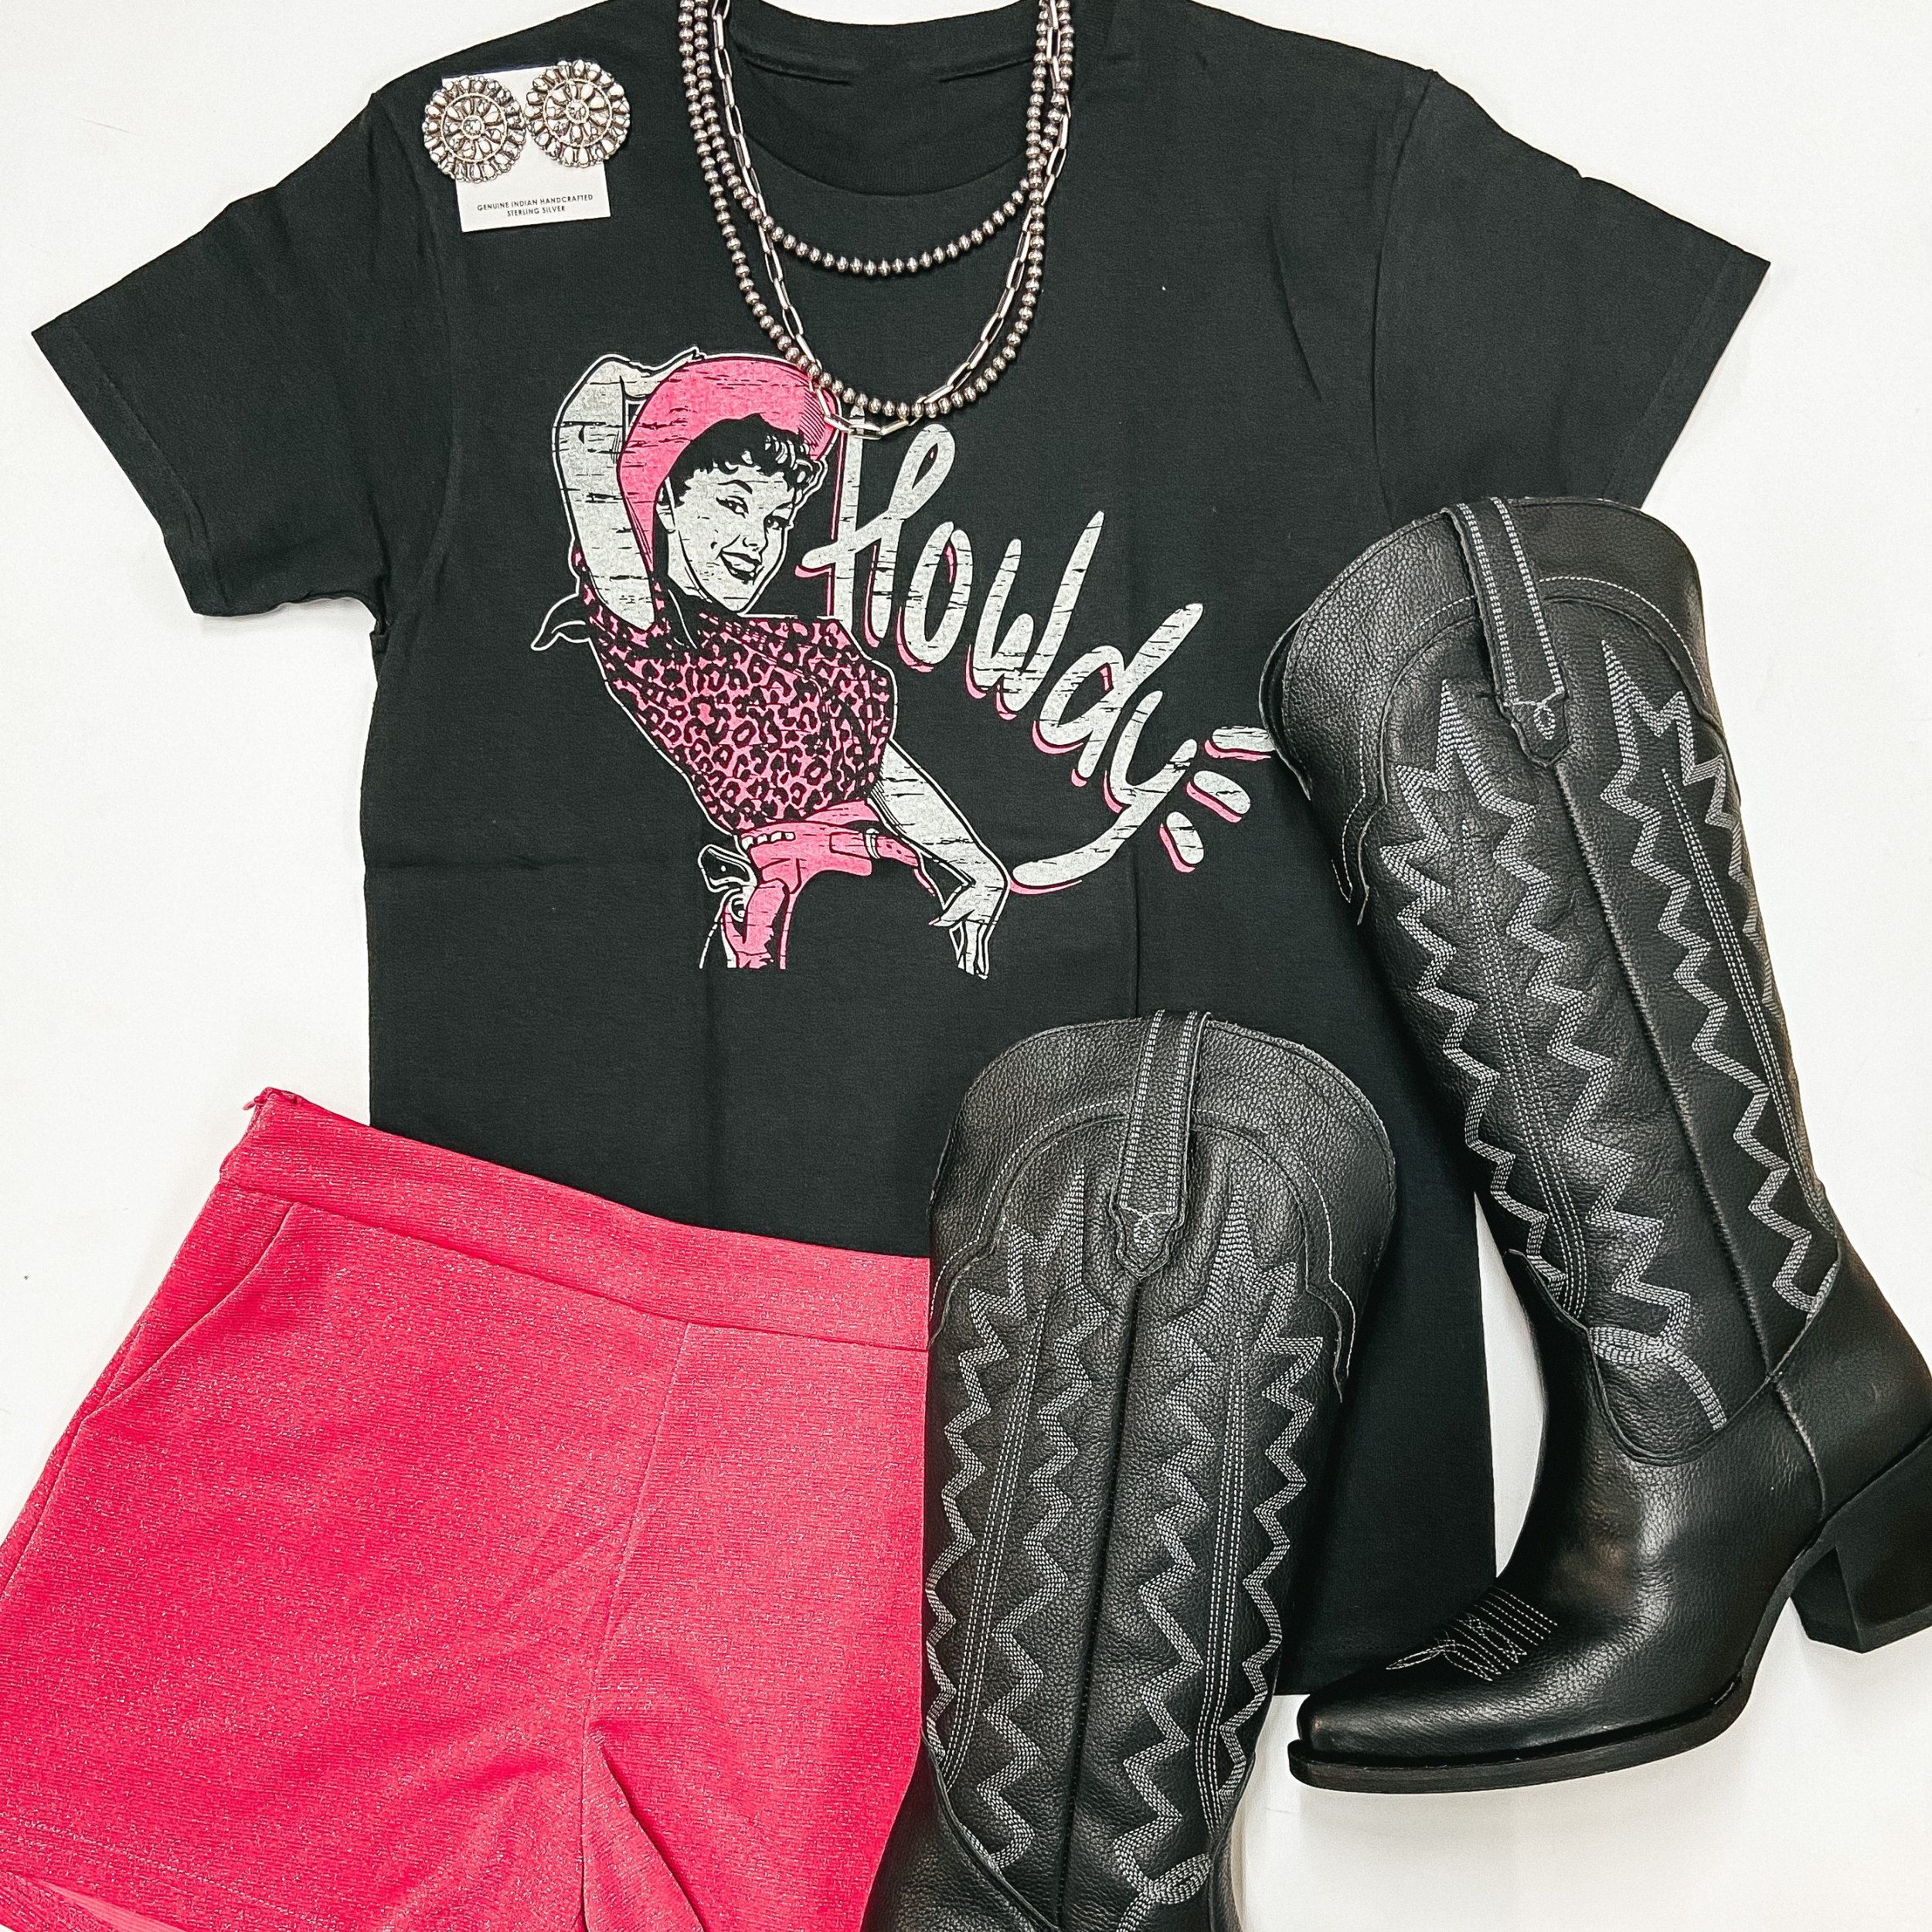  The graphic tee is black and says "Howdy" with a cowgirl wearing pink. The tee shirt is pictured with a black hat, pink sequin shorts, black cowgirl boots, and sterling silver Navajo Pearls.